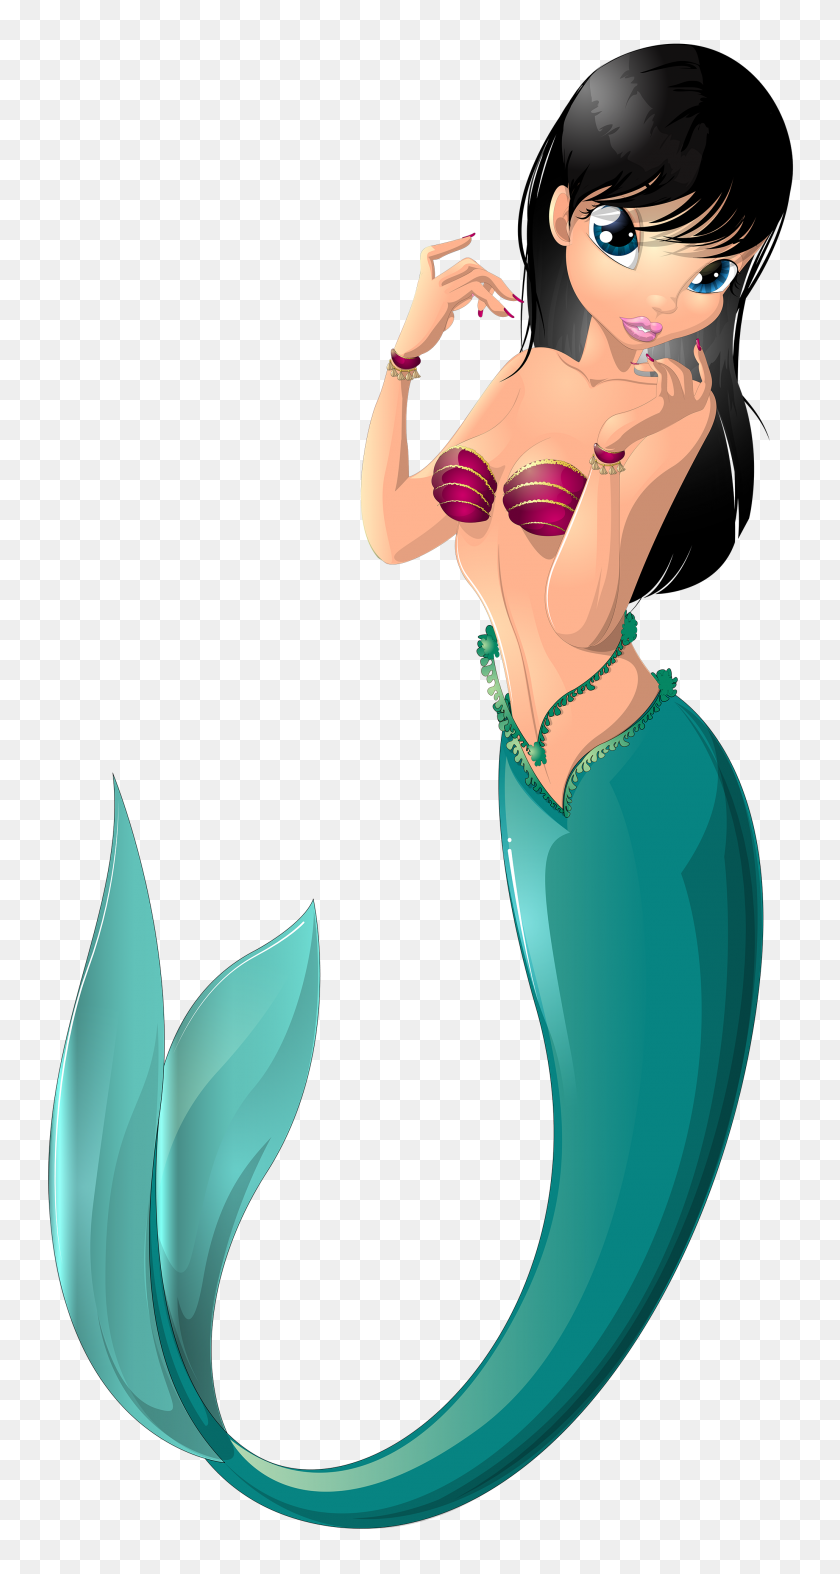 2060x4000 Mermaid Clip Art Images Use These Free Mermaid Clip Art - Delta Clipart